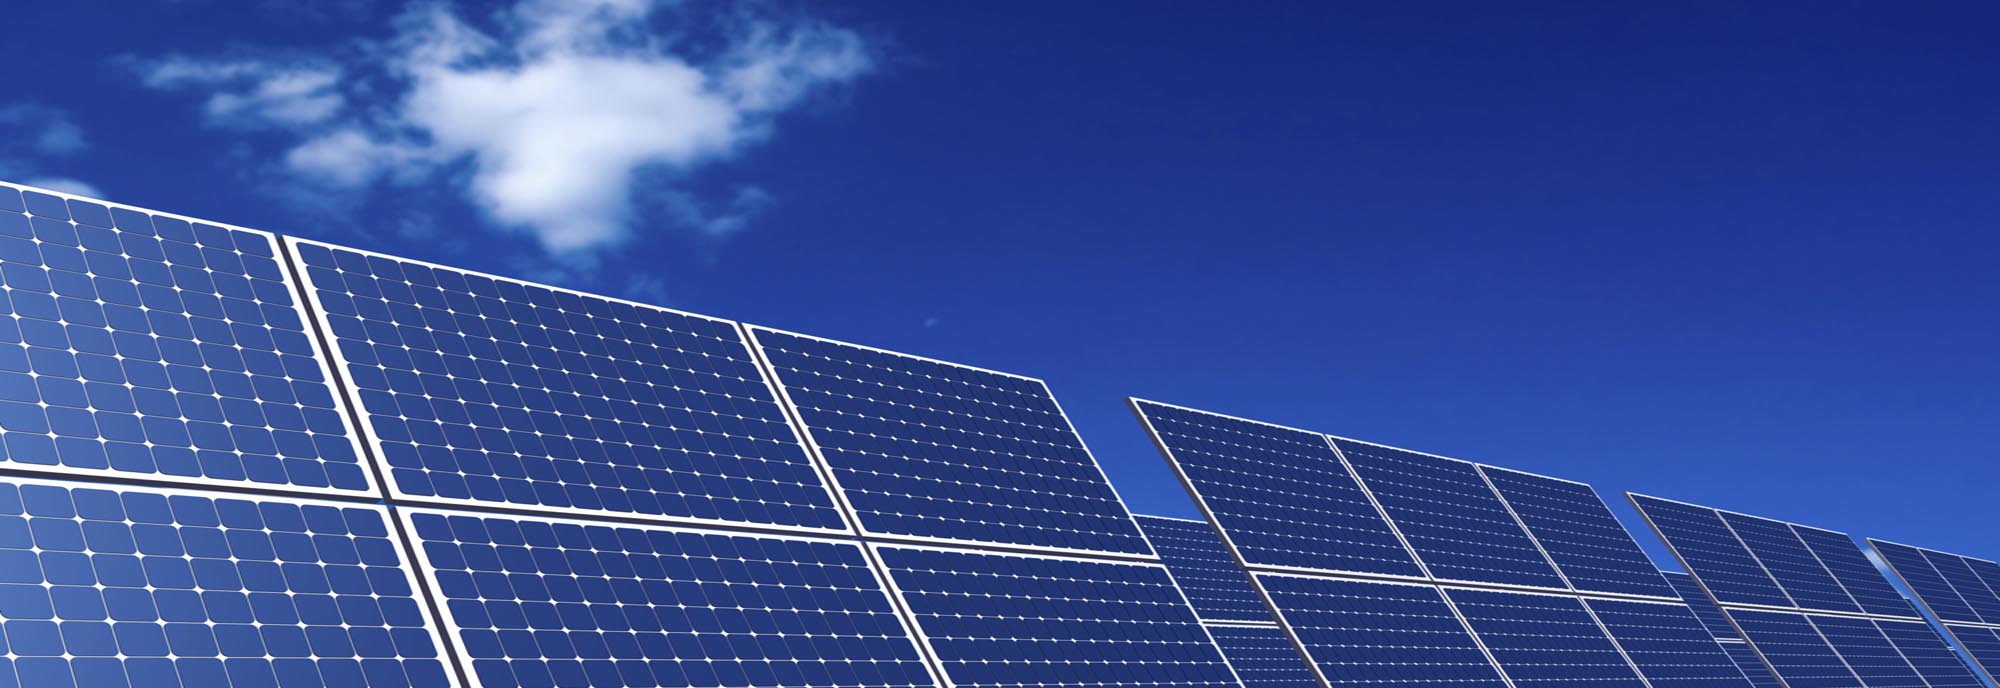 redpi solar services, energy, power, projects, power plants, solar power system